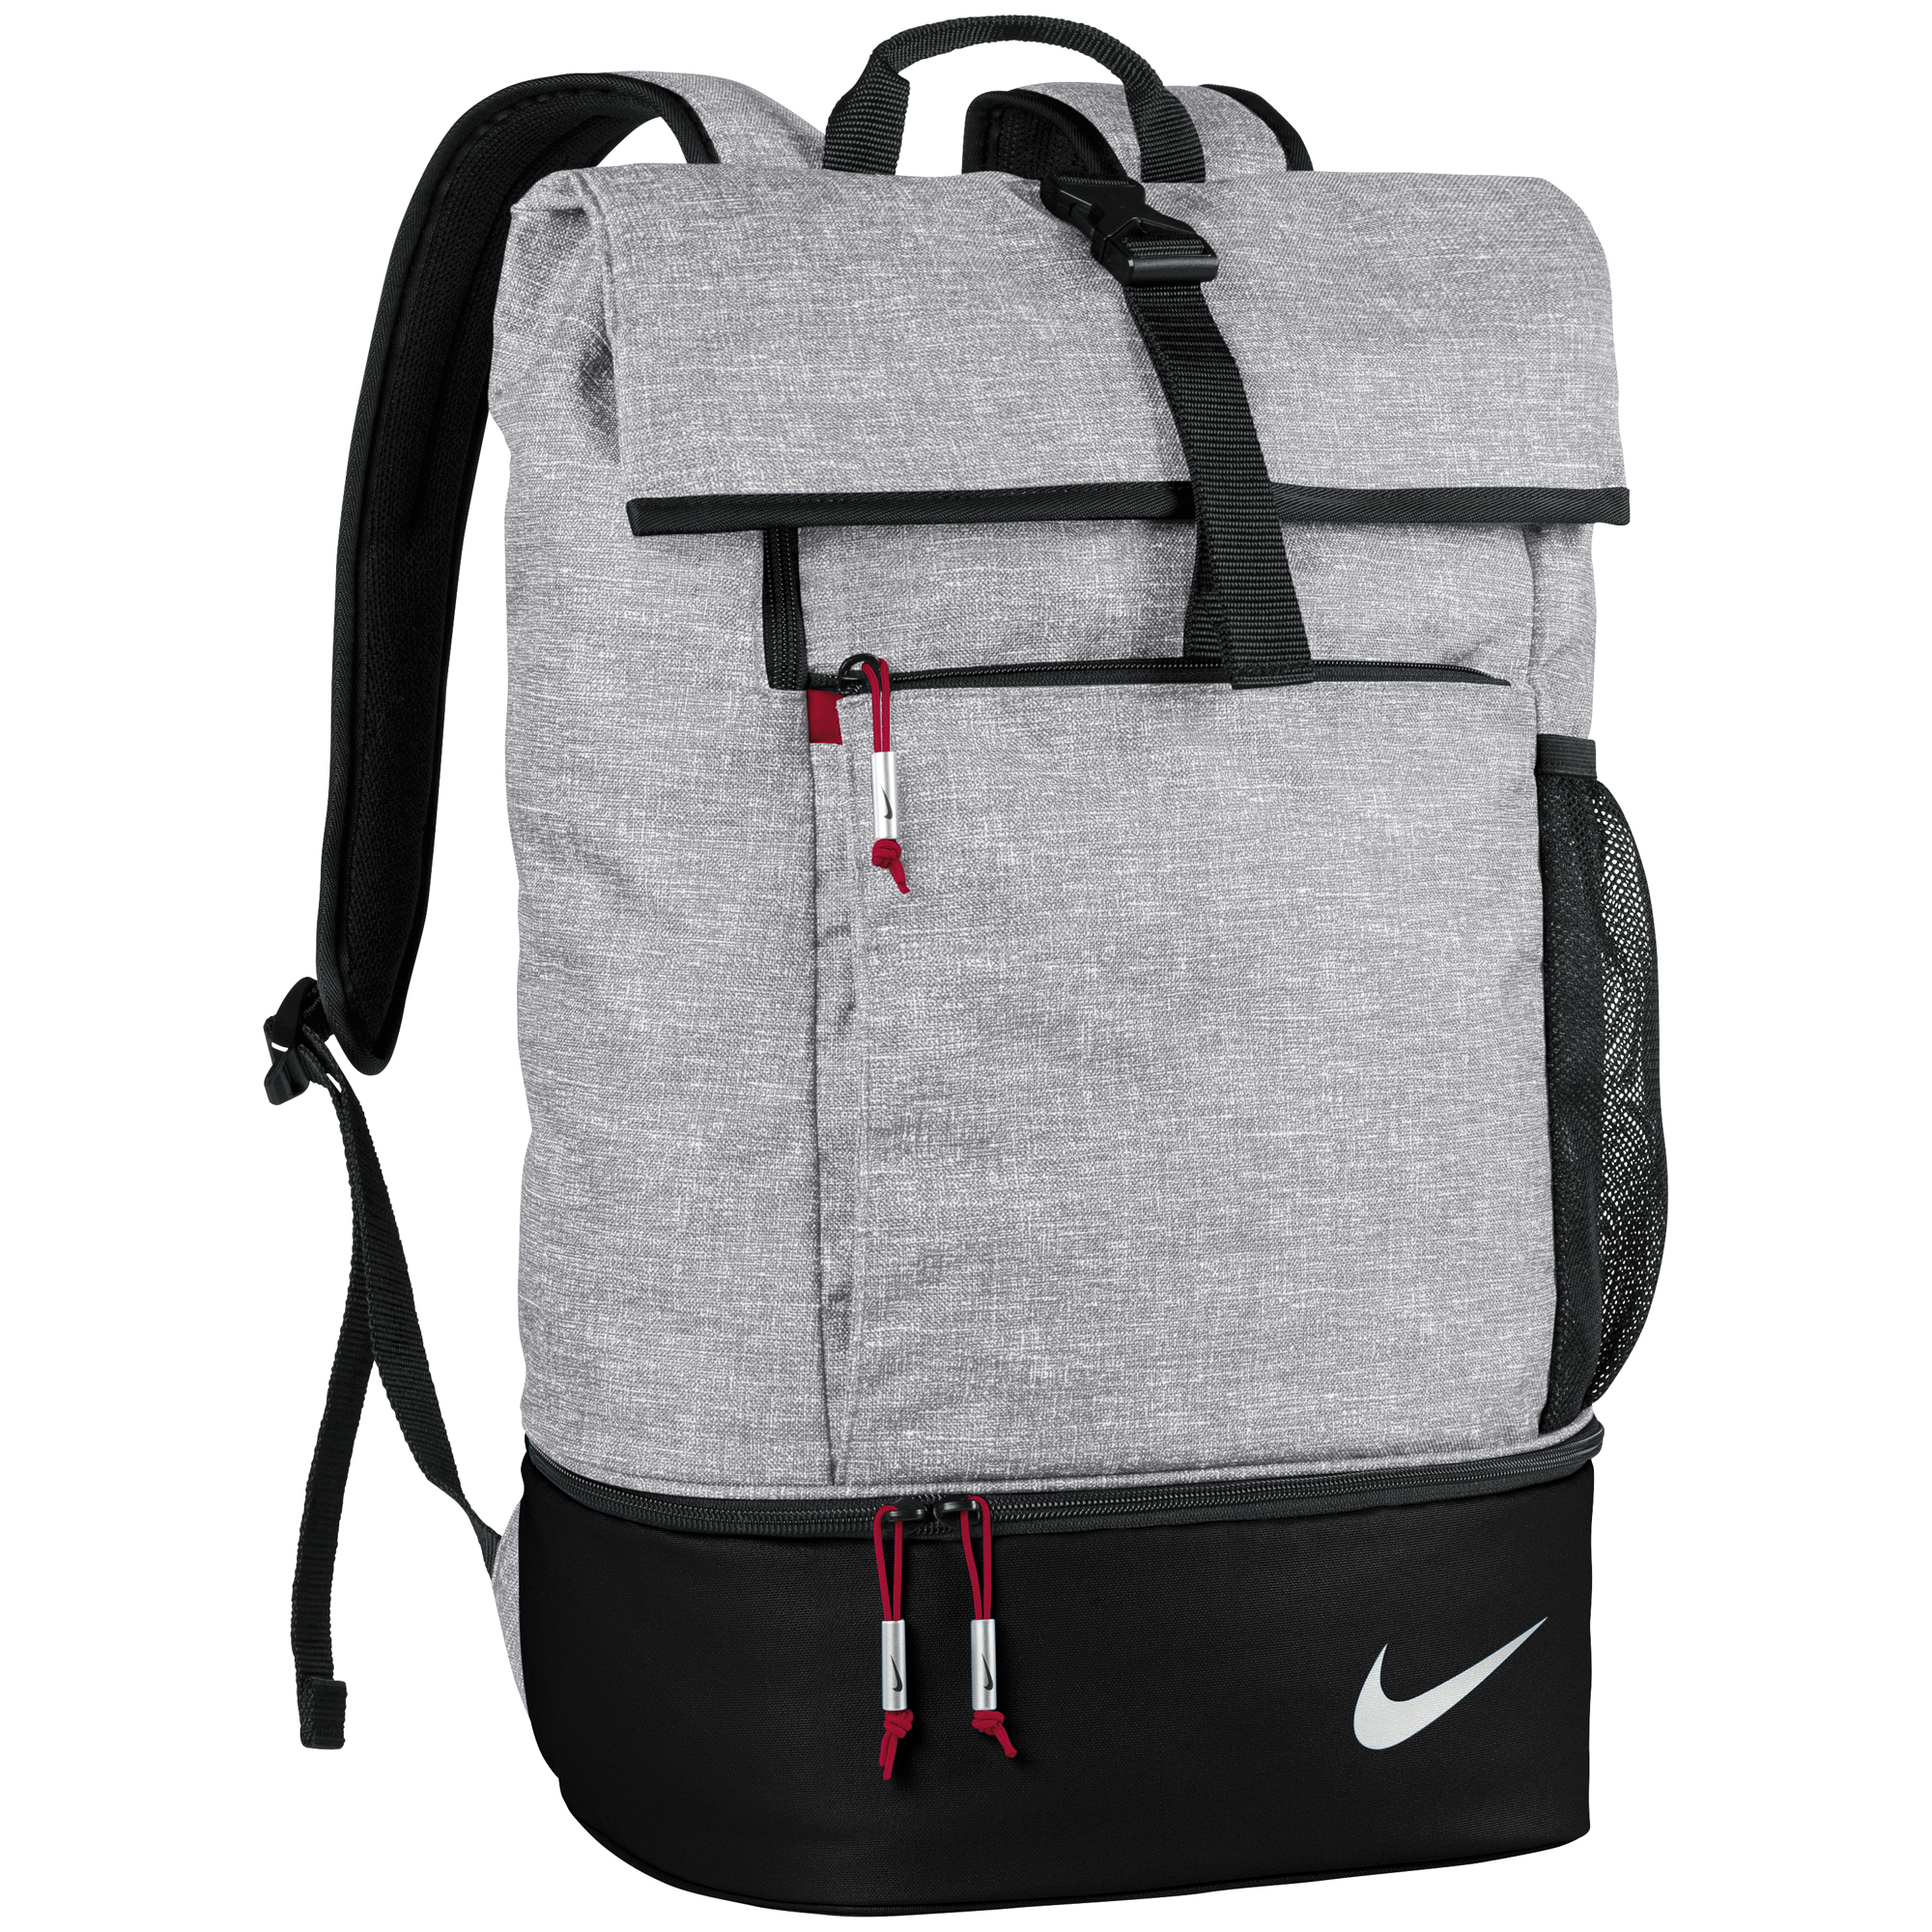 Nike Sport Backpack with TN Home Run Derby logo embroidered